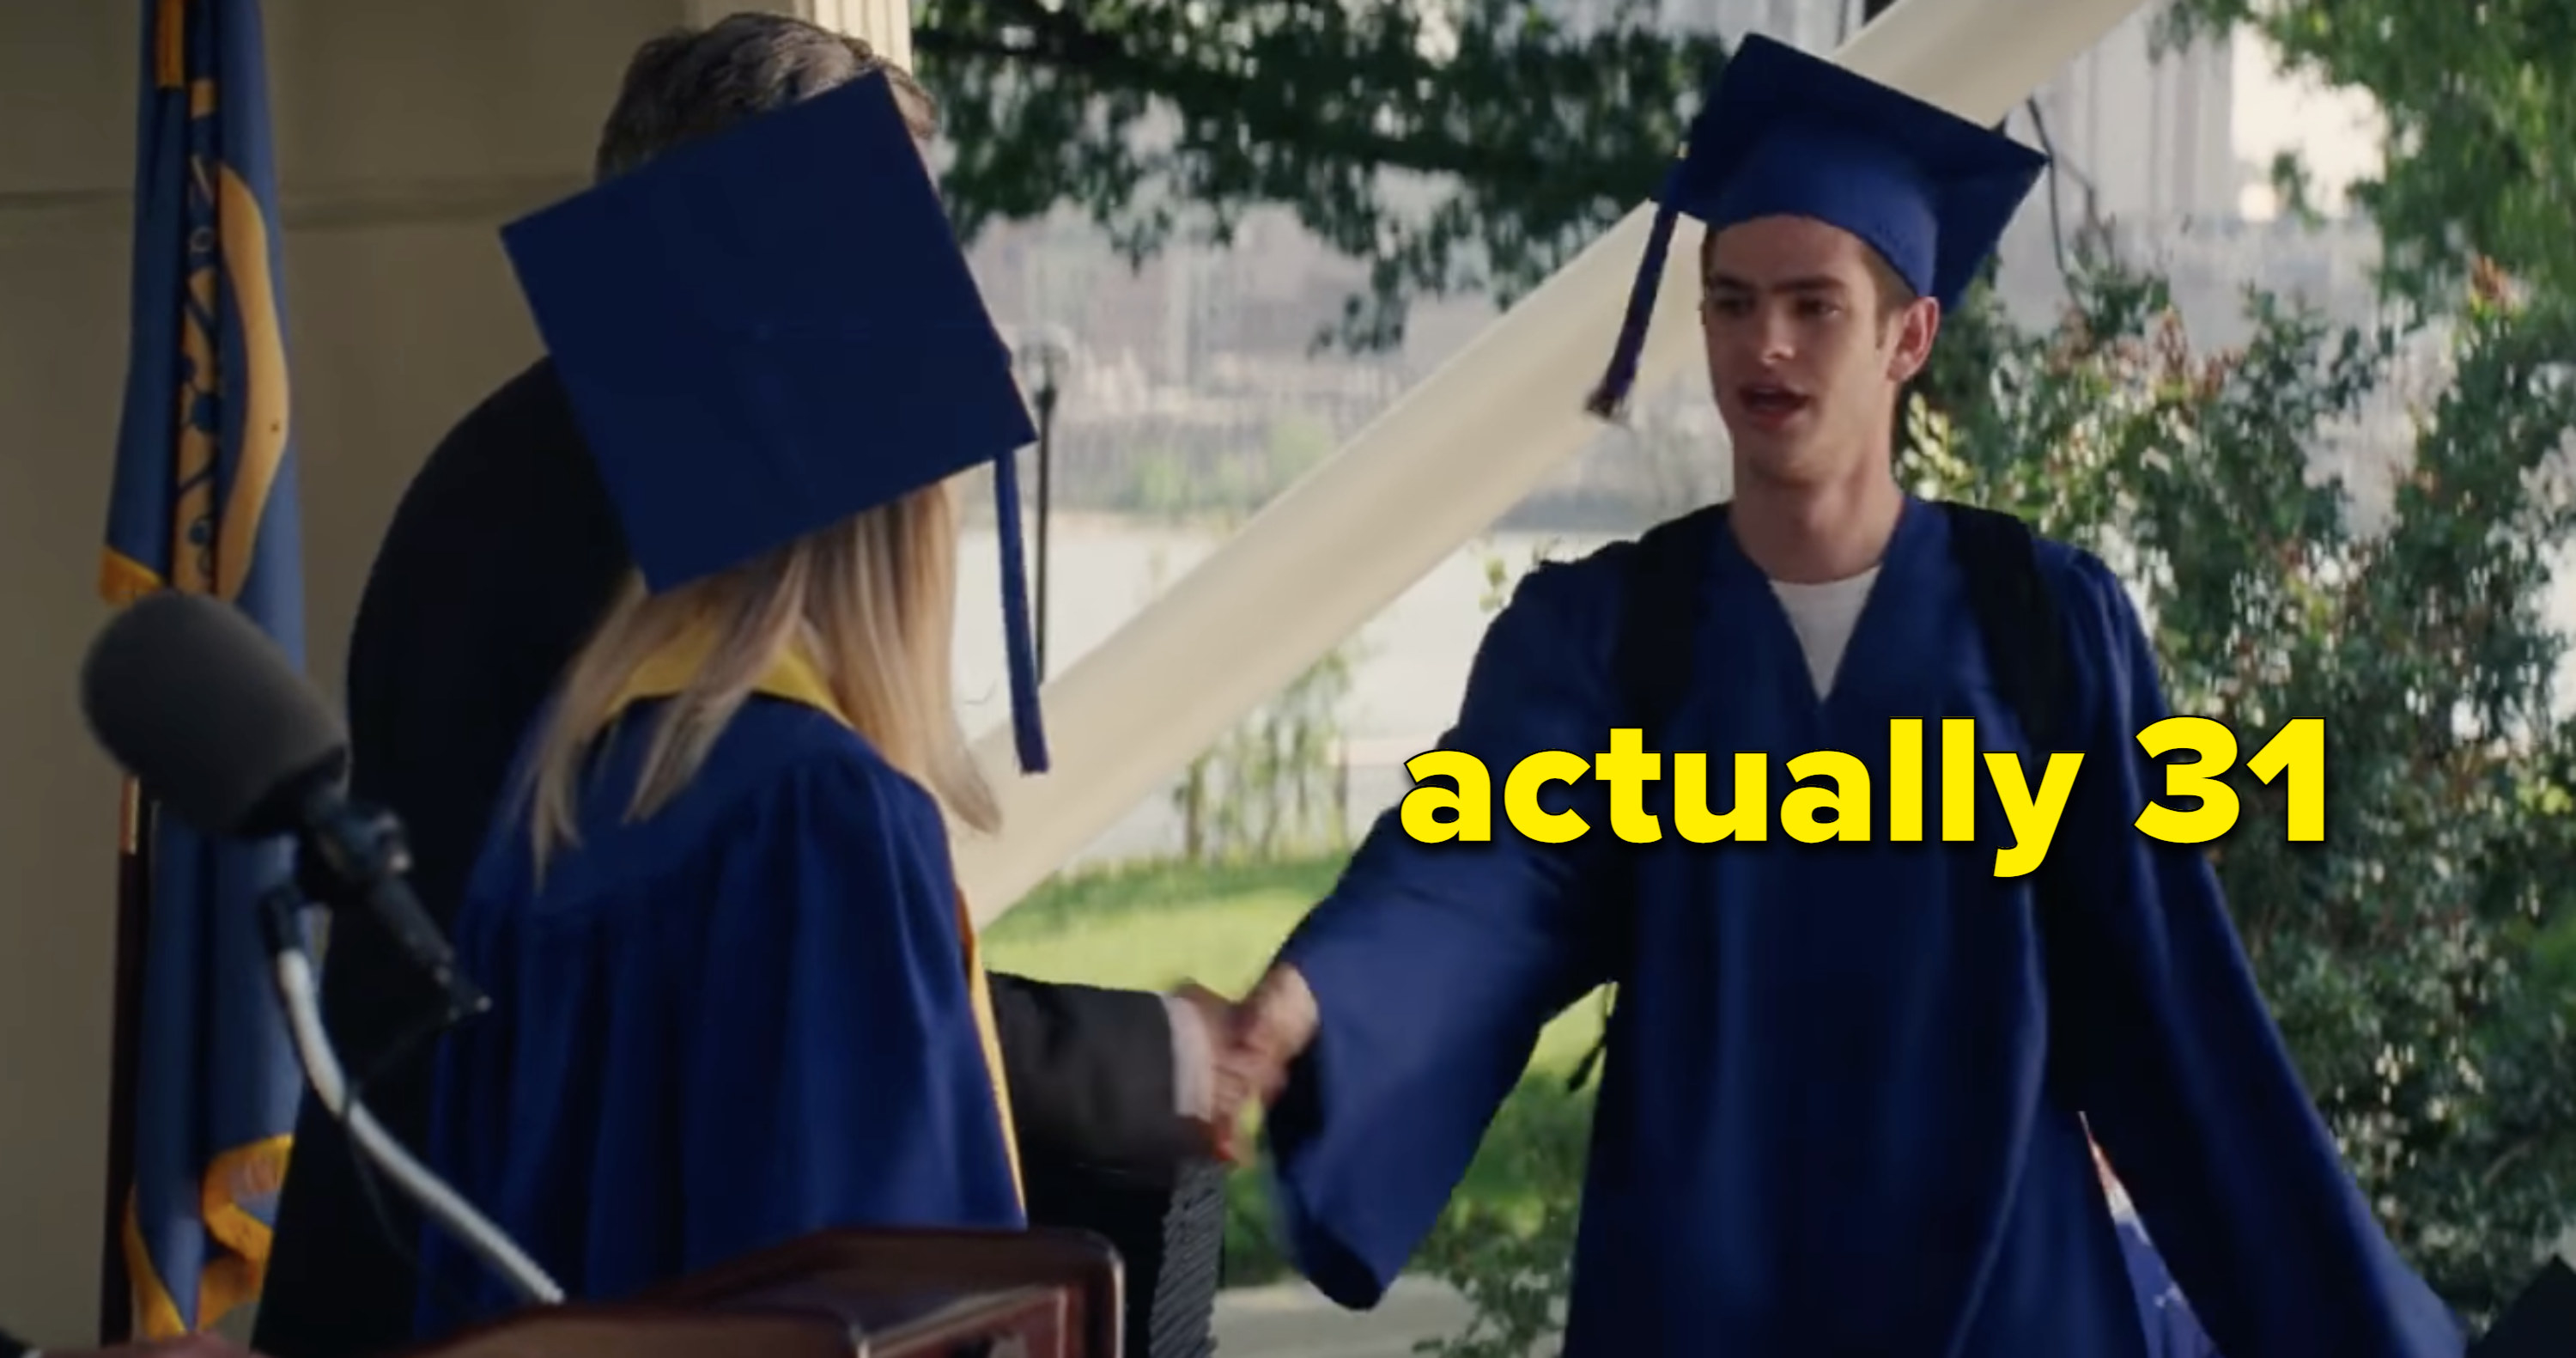 Andrew Garfield as Peter Parker graduating high school, but he&#x27;s actually 31